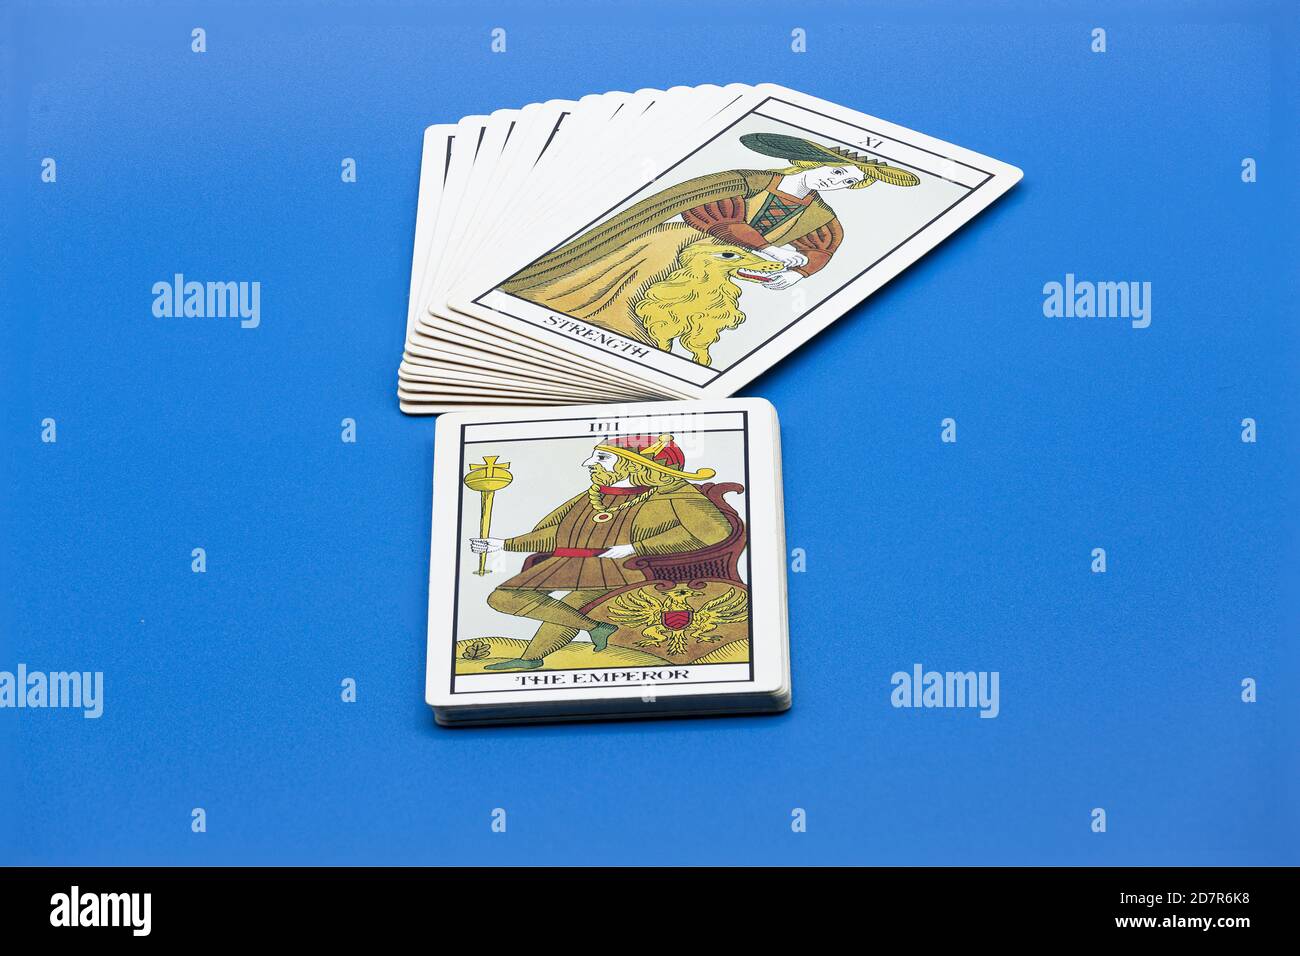 Stack of tarot cards on blue surface Stock Photo